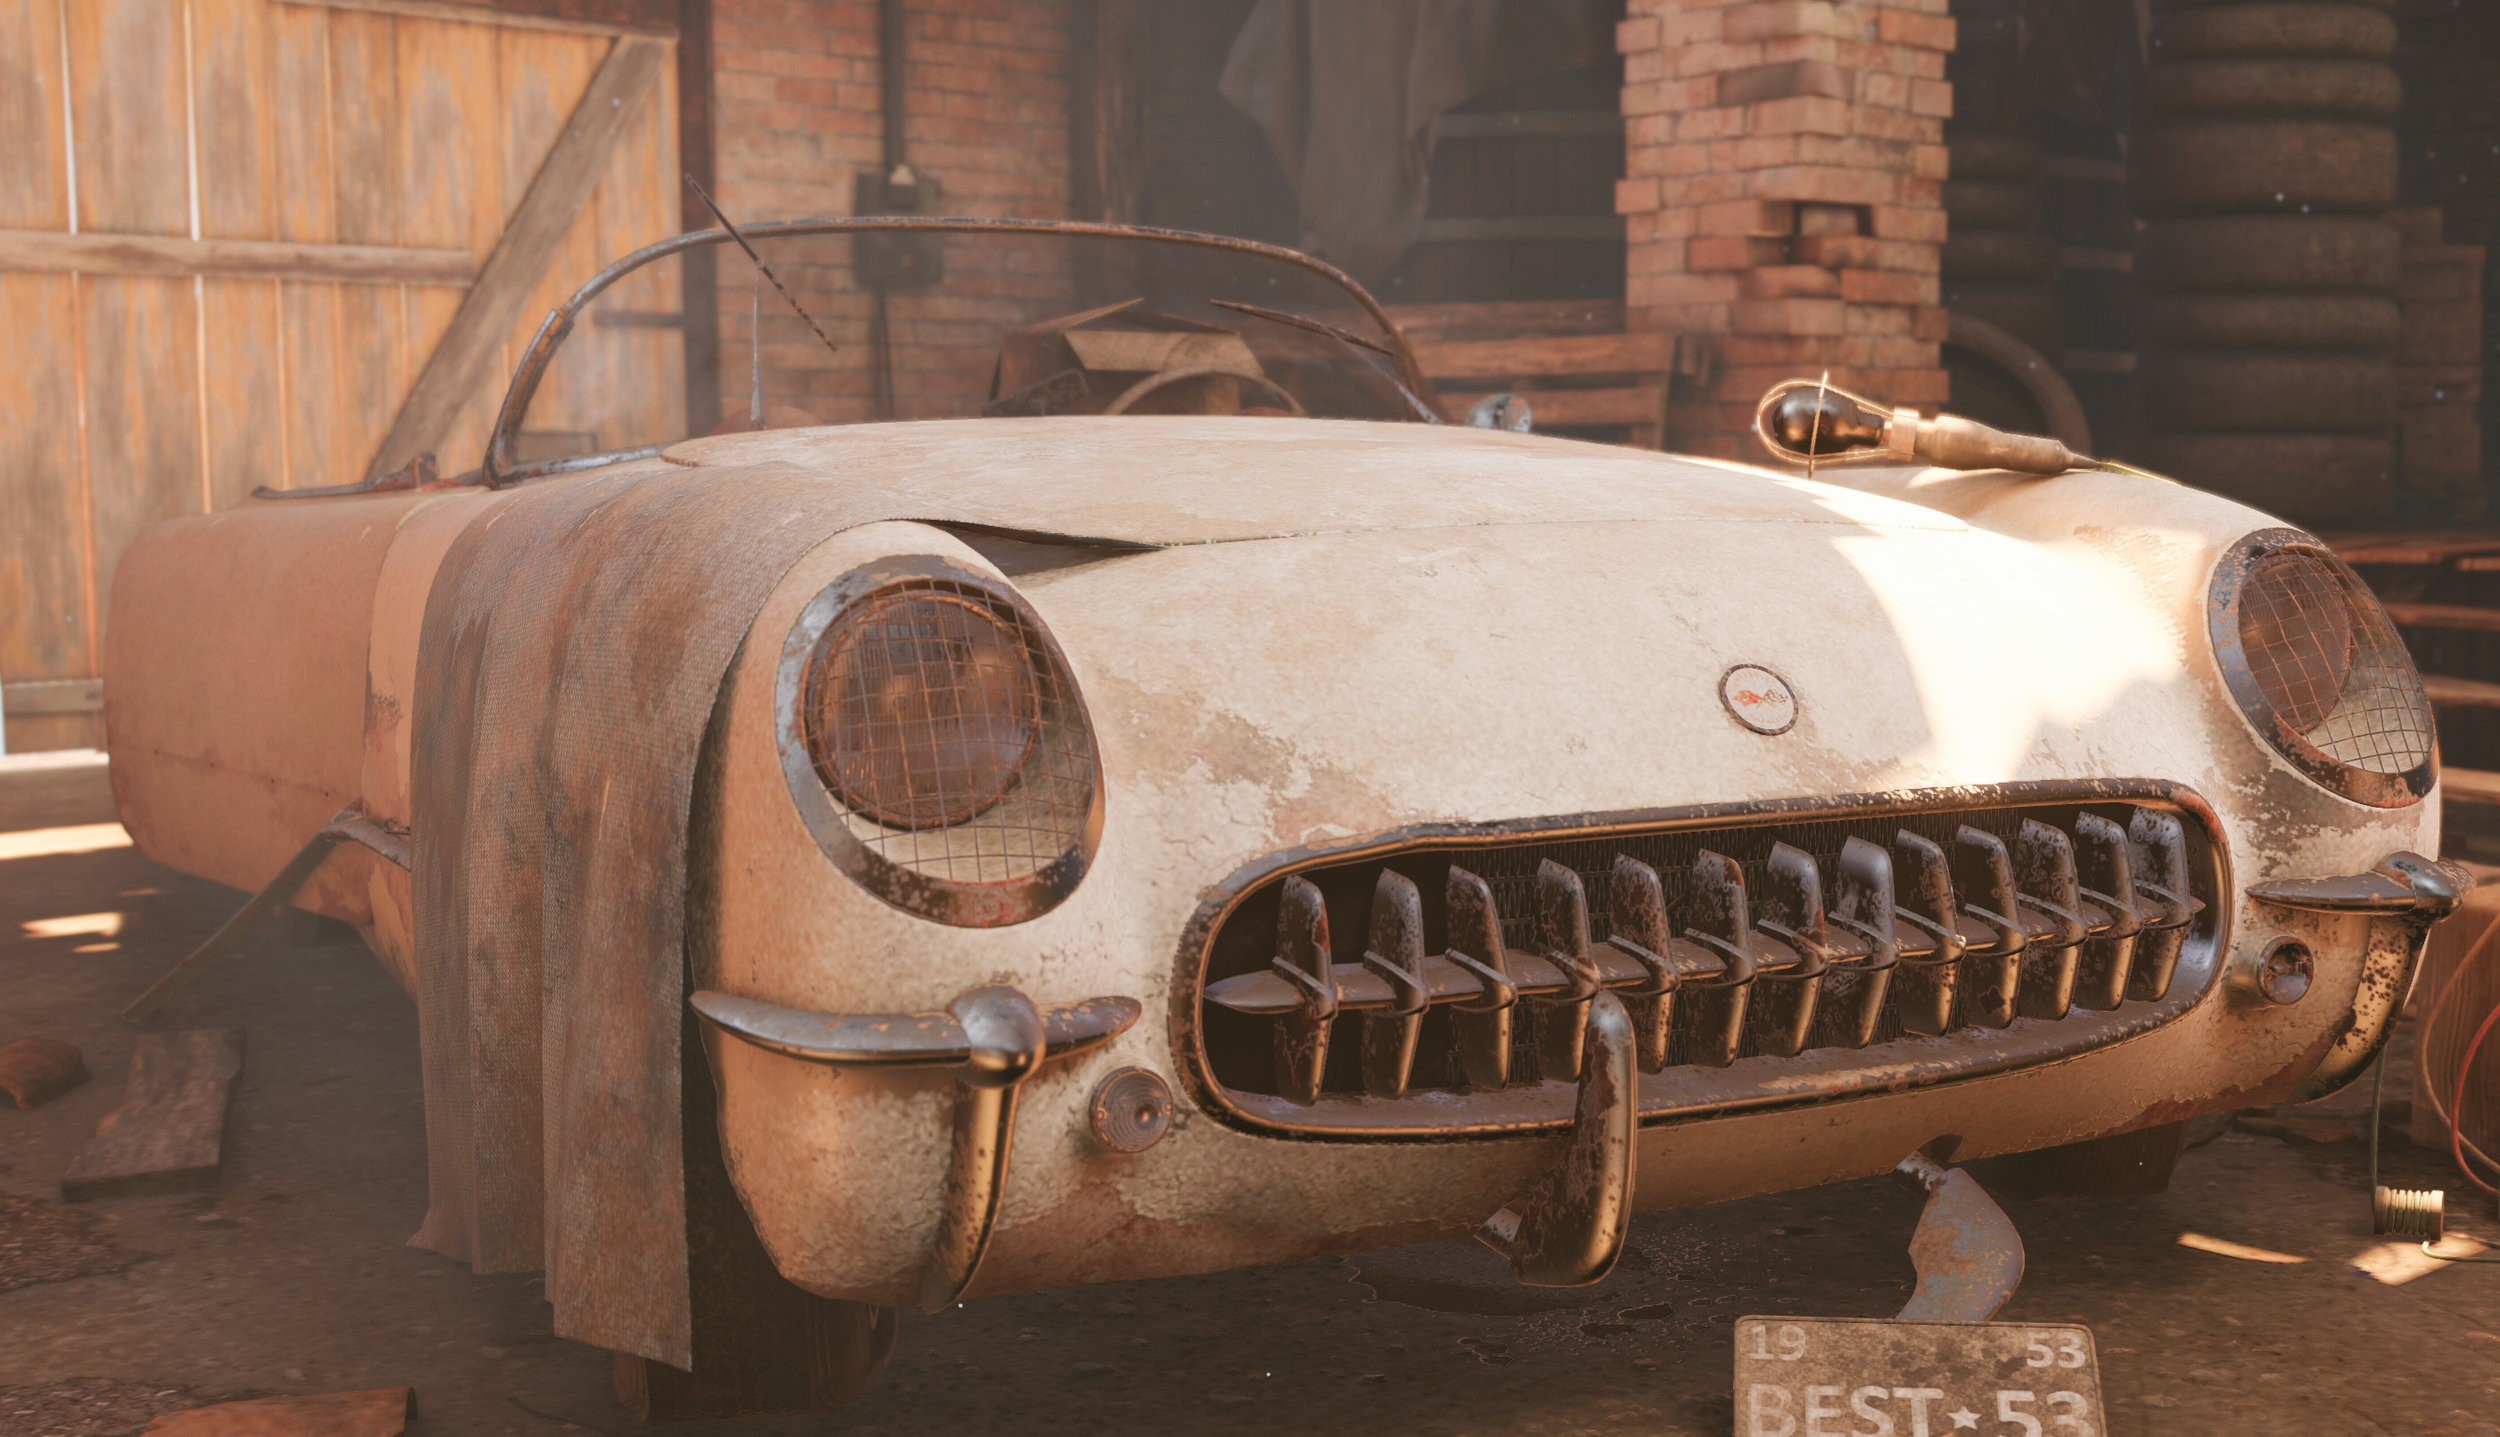 Forza Horizon 5 Barn Finds locations and how to restore them